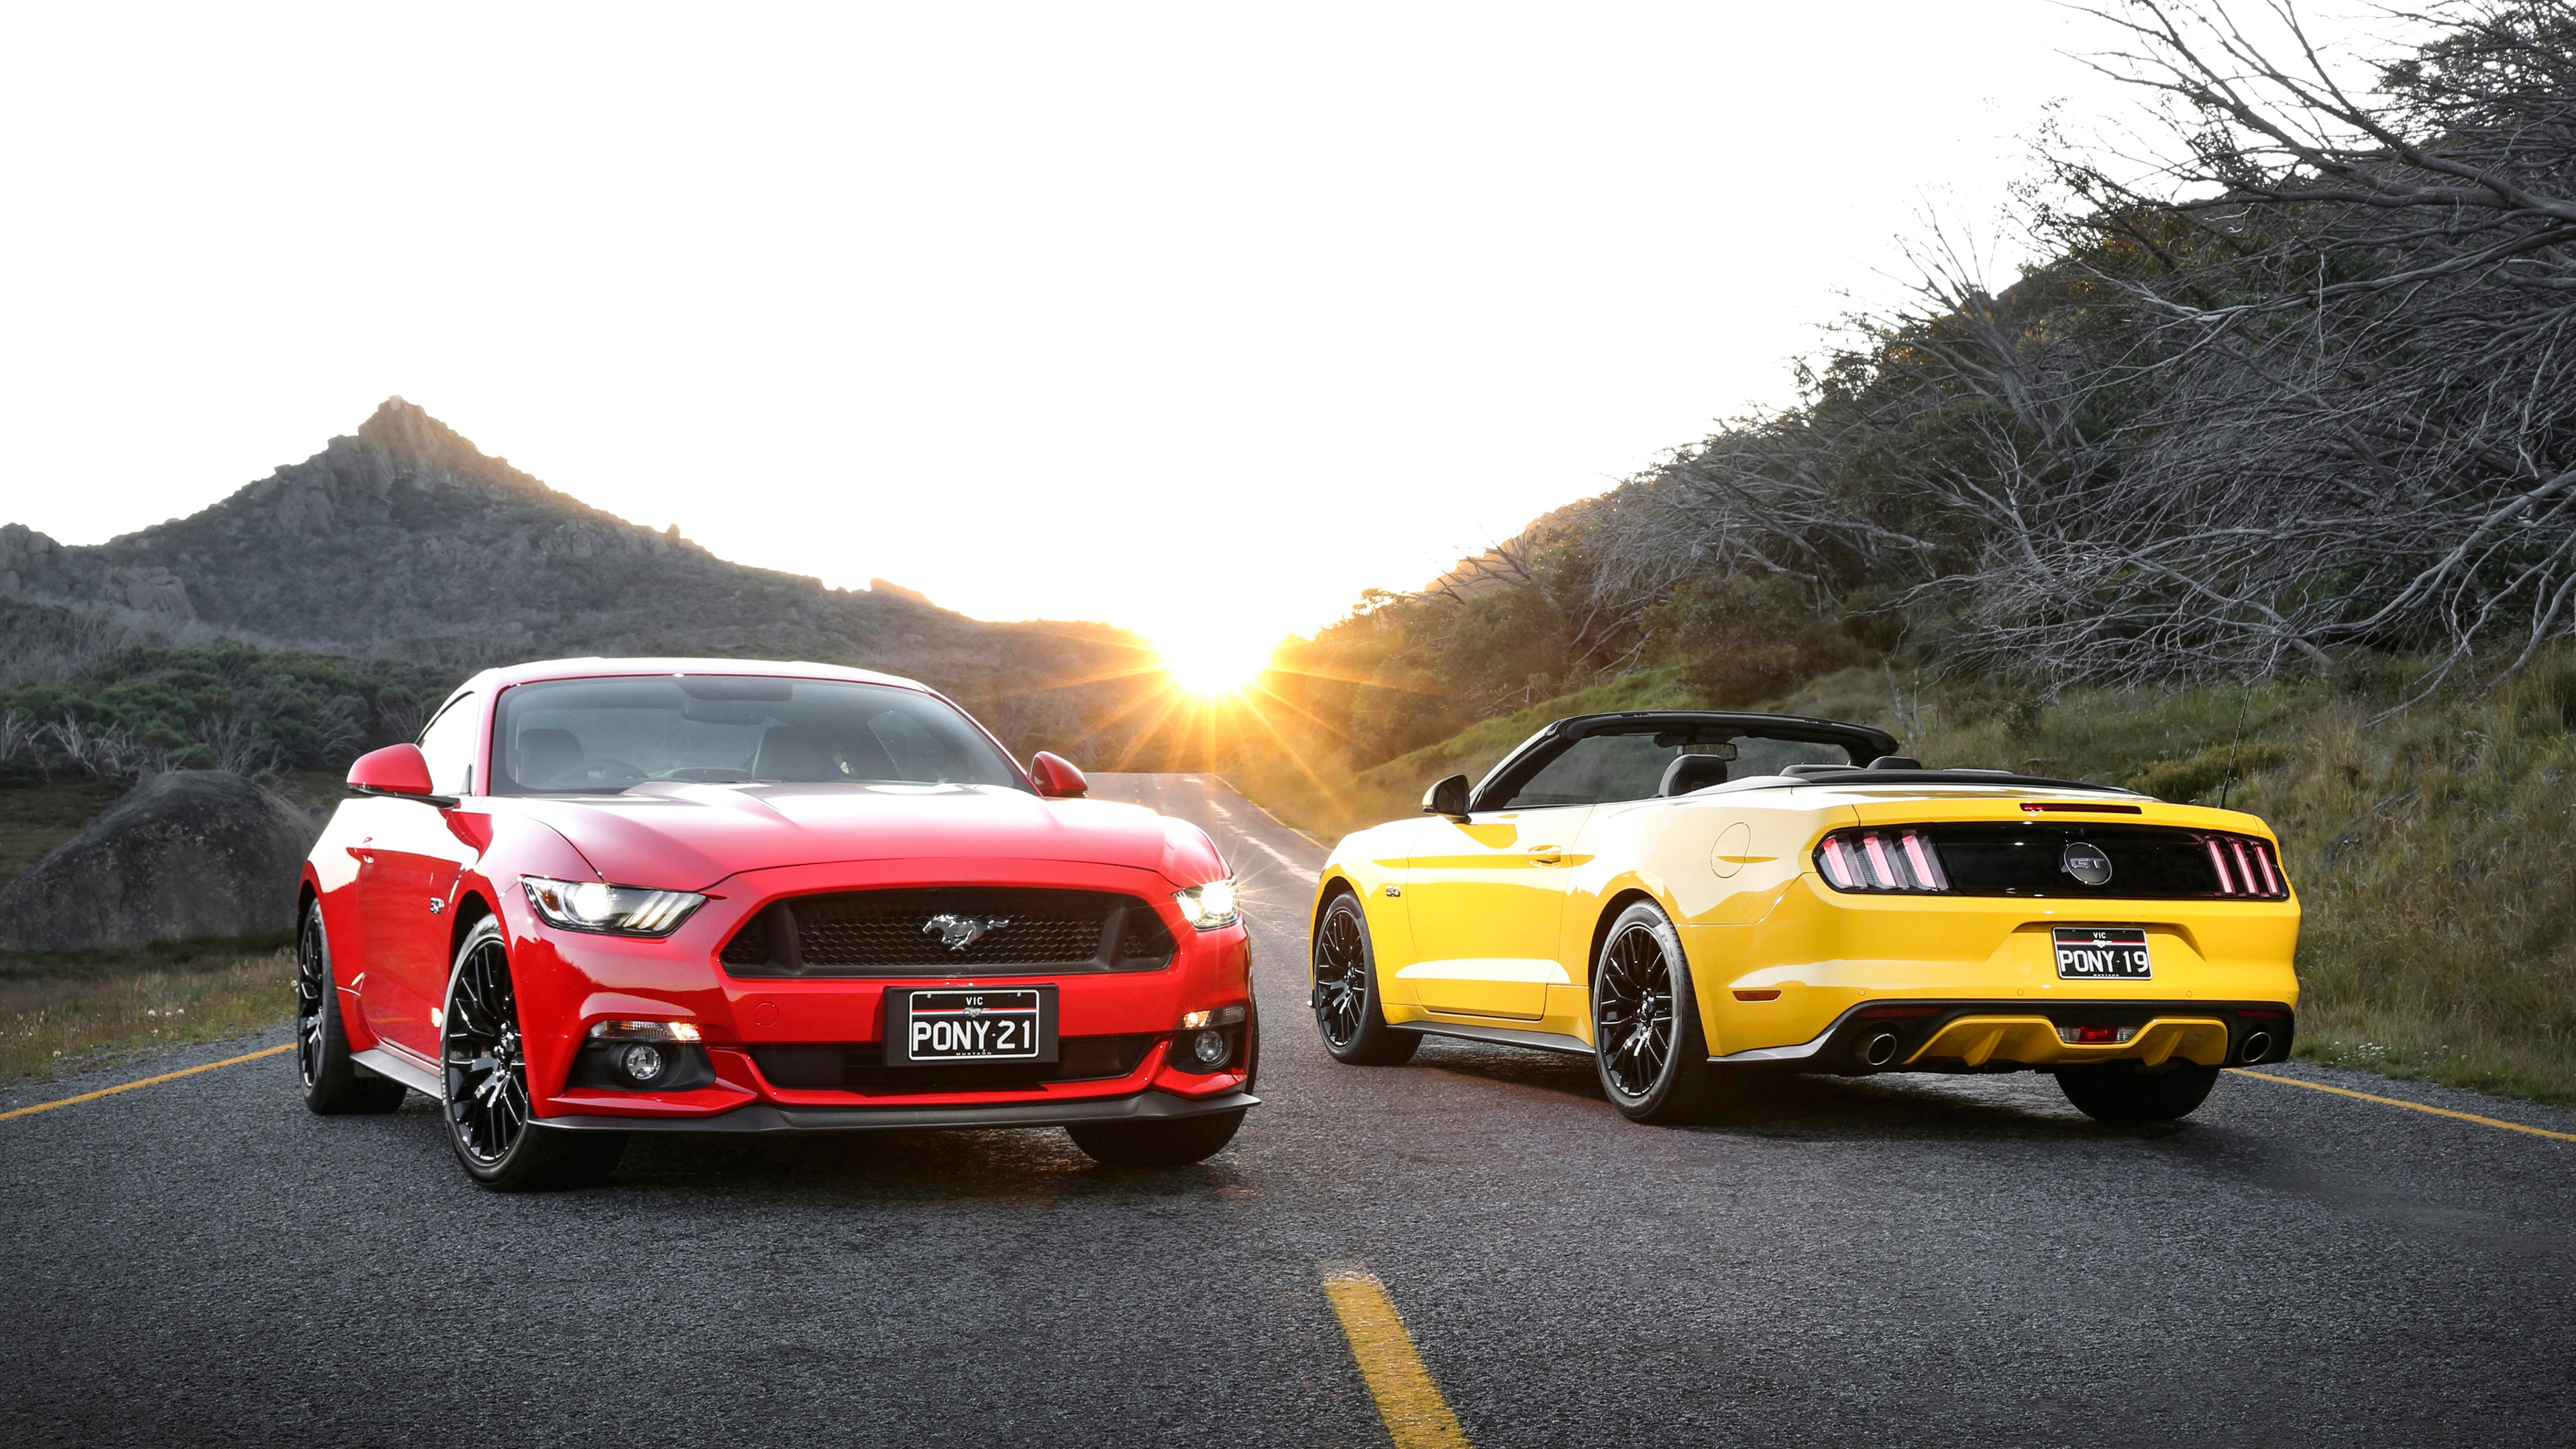 Red Ford Mustang Hd Wallpaper